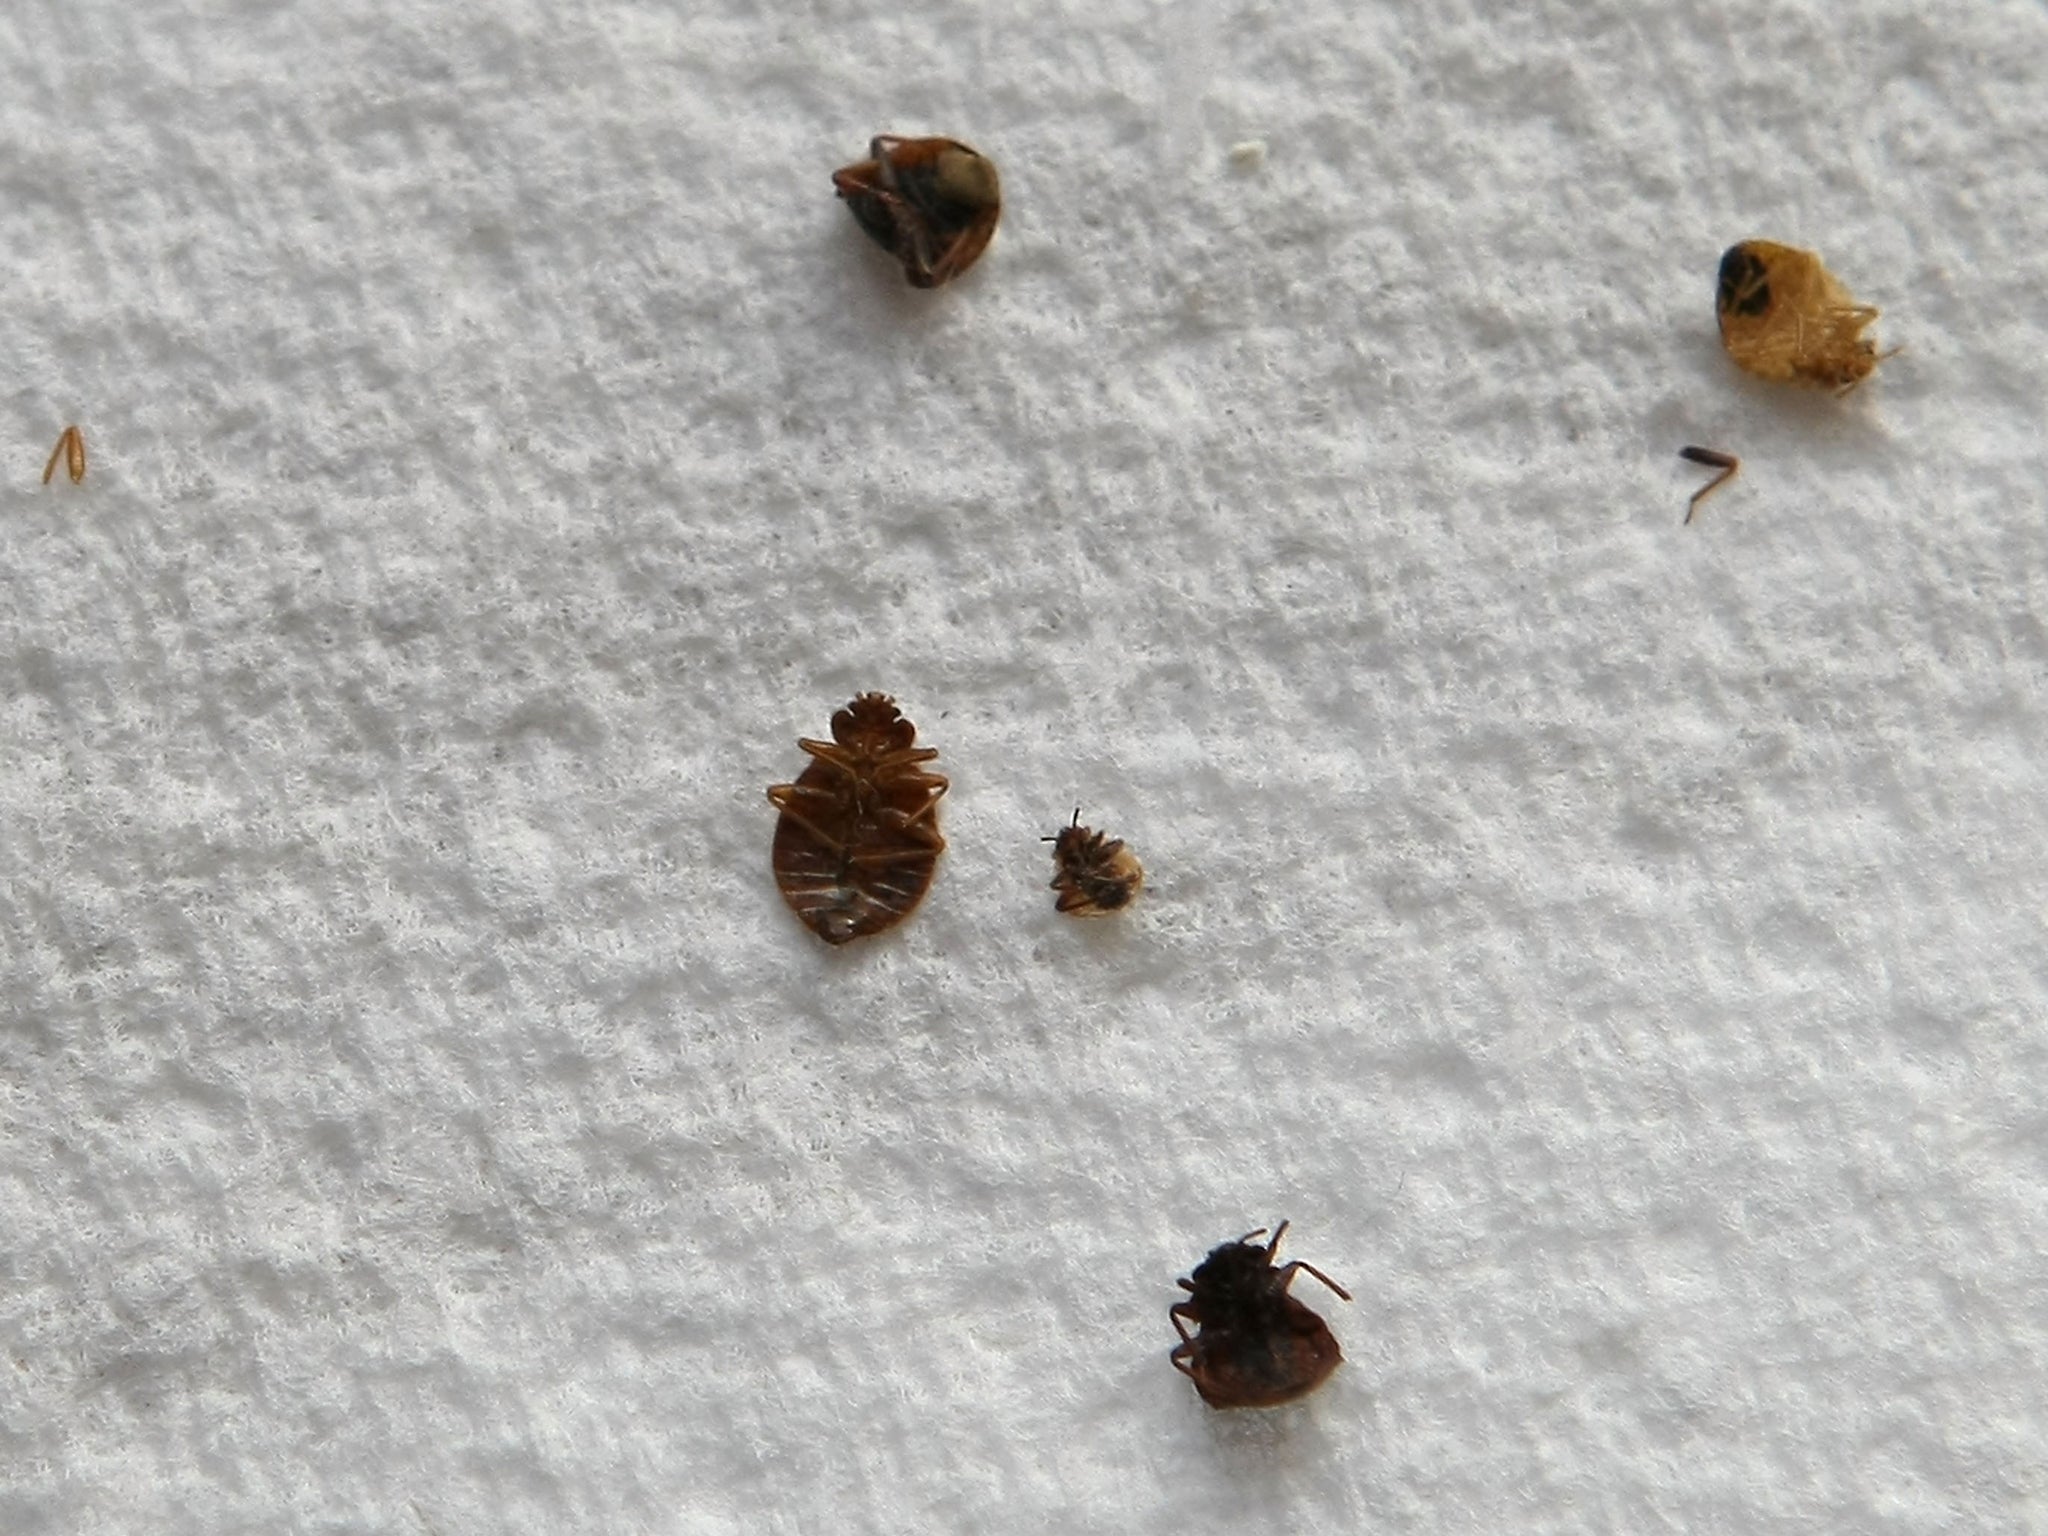 France has opened an bedbugs information hotline to help protect people as the number of infestations rises